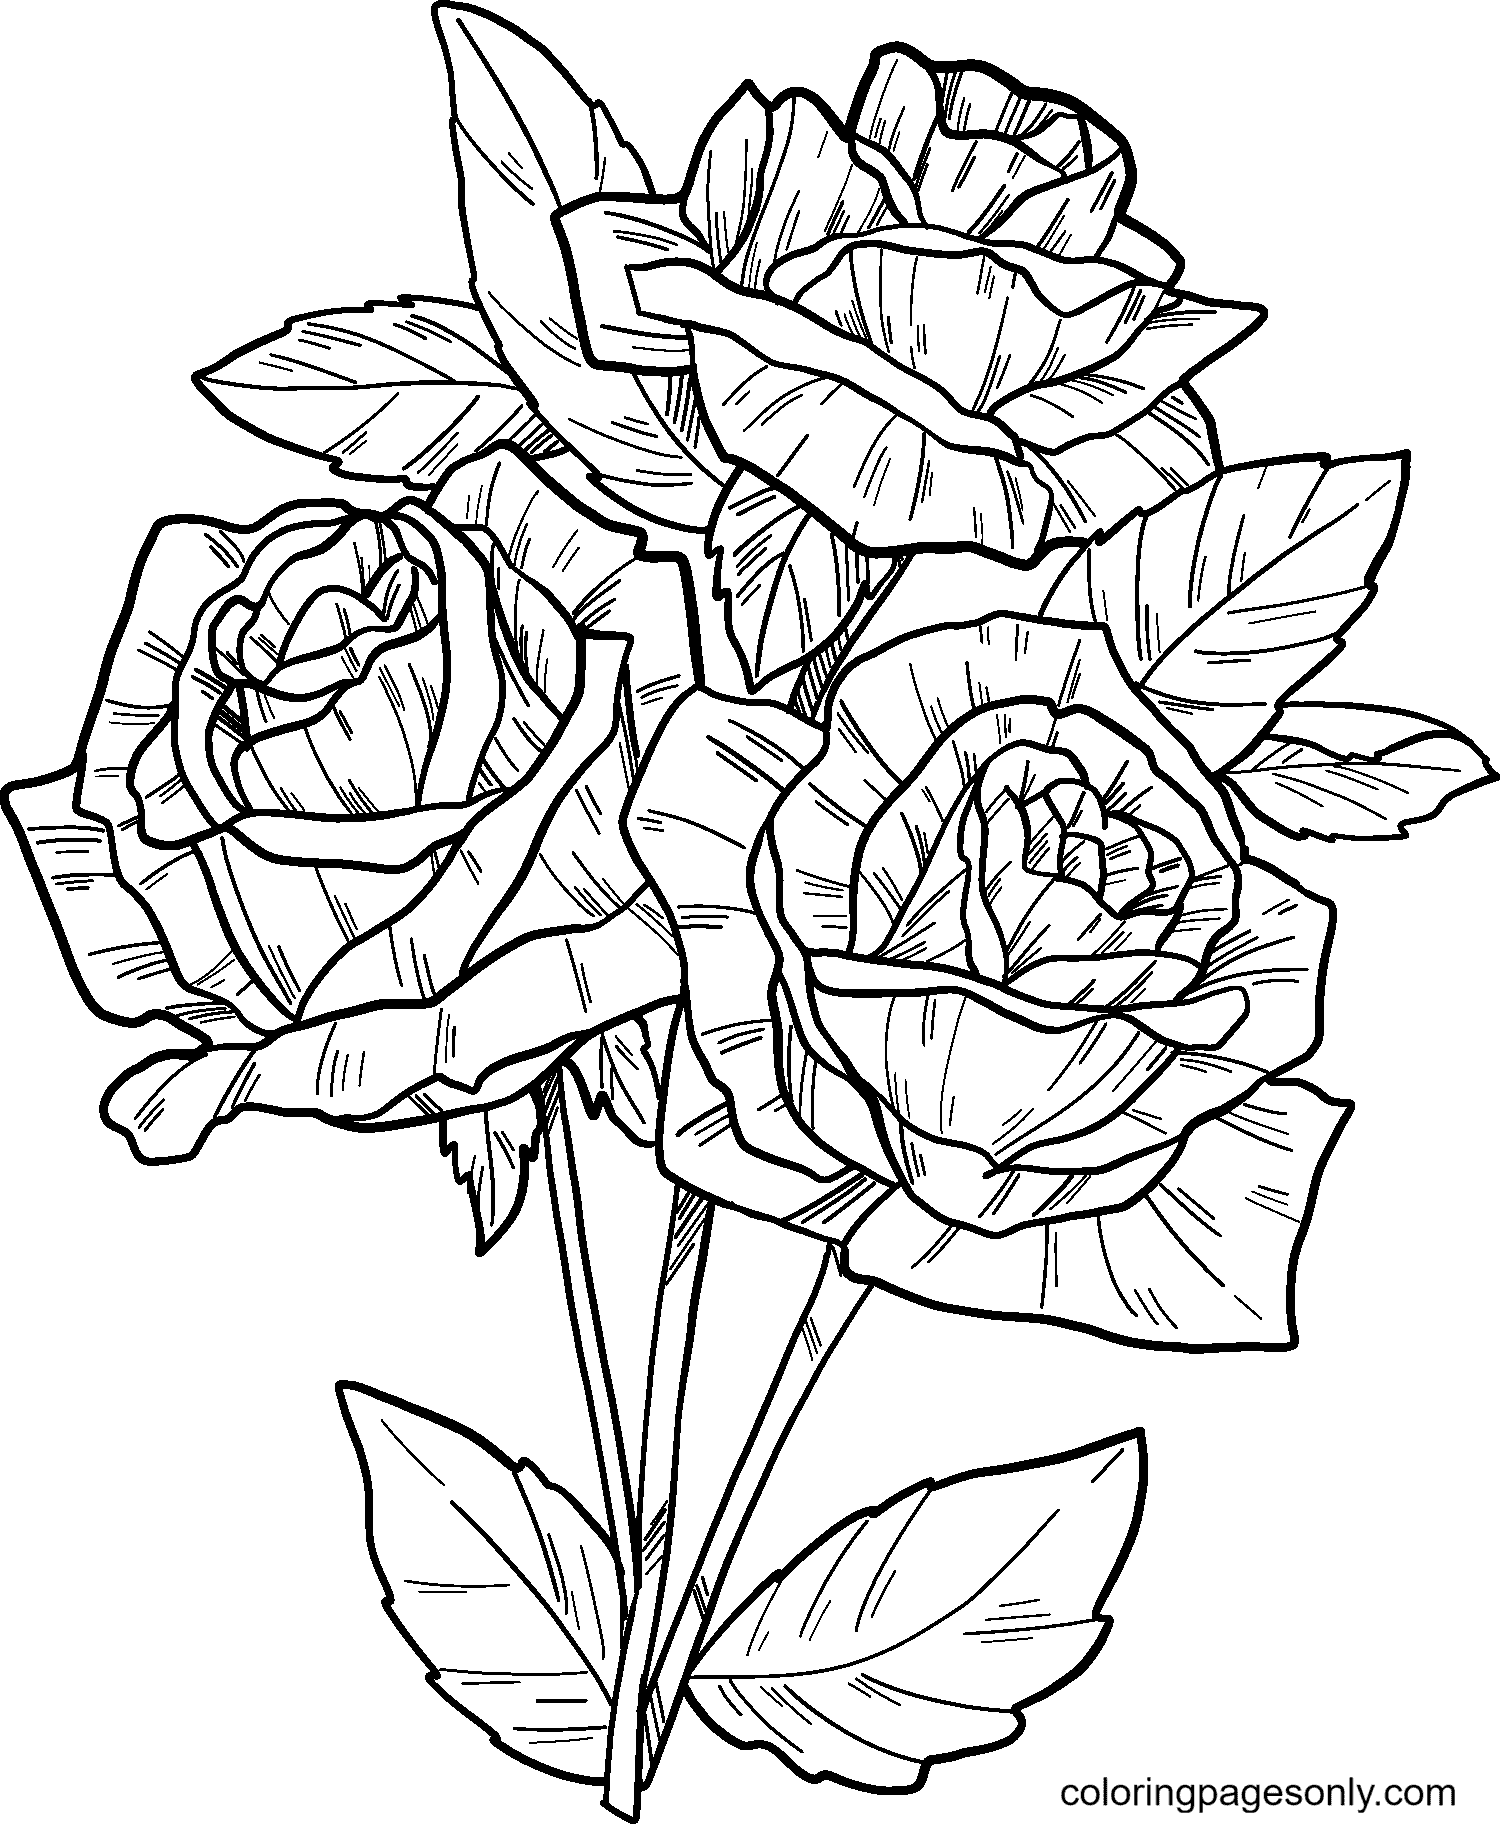 Three Roses in Full Bloom Coloring Page